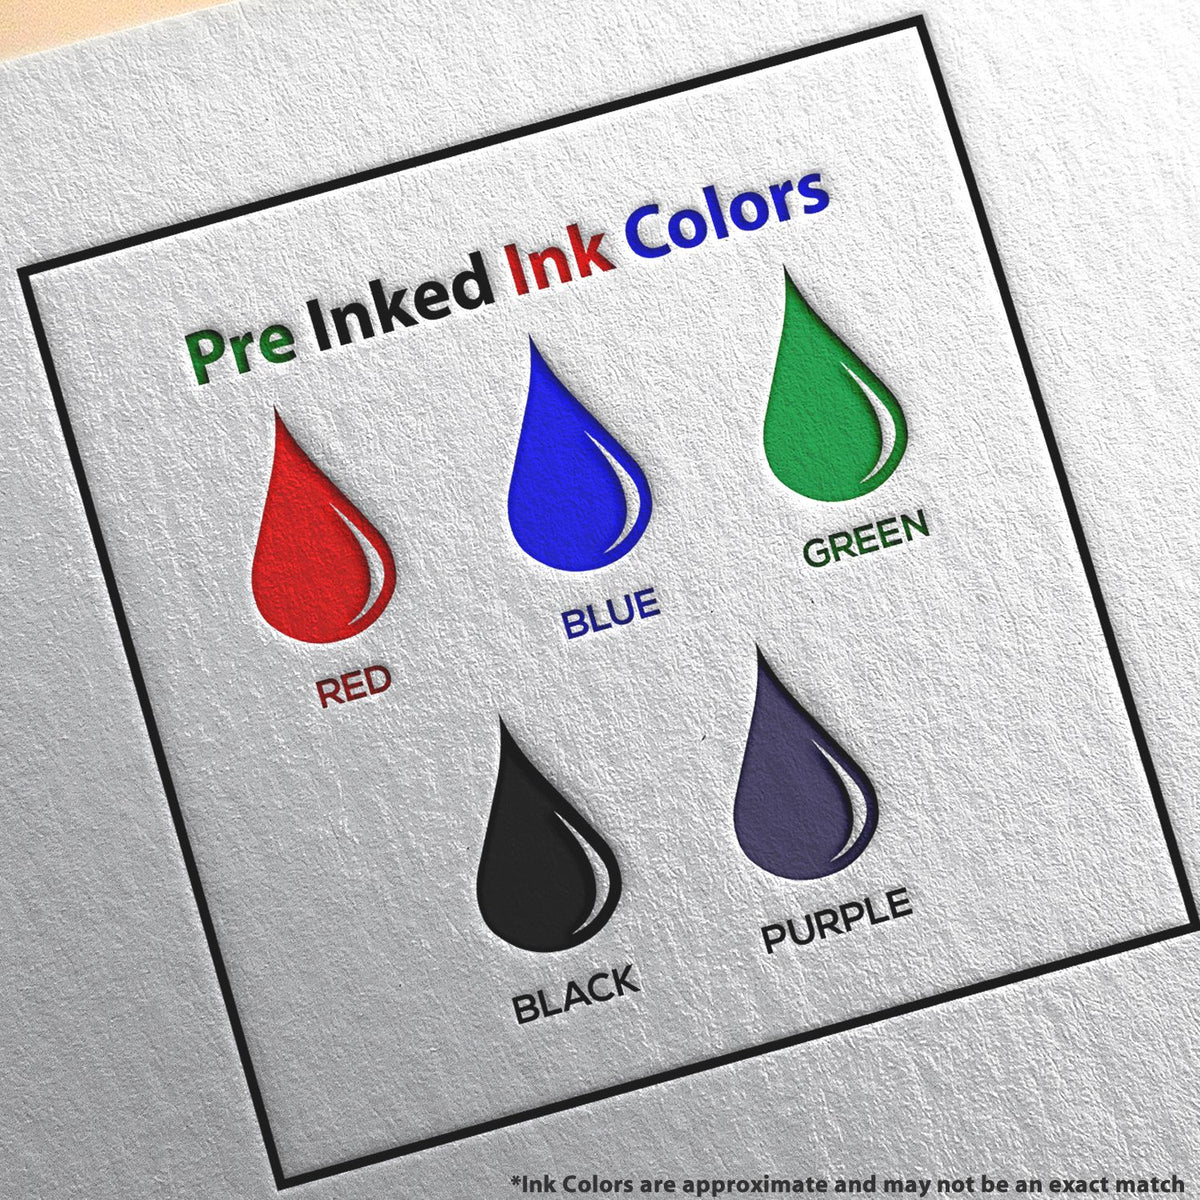 A picture showing the different ink colors or hues available for the Slim Pre-Inked Rhode Island Landscape Architect Seal Stamp product.